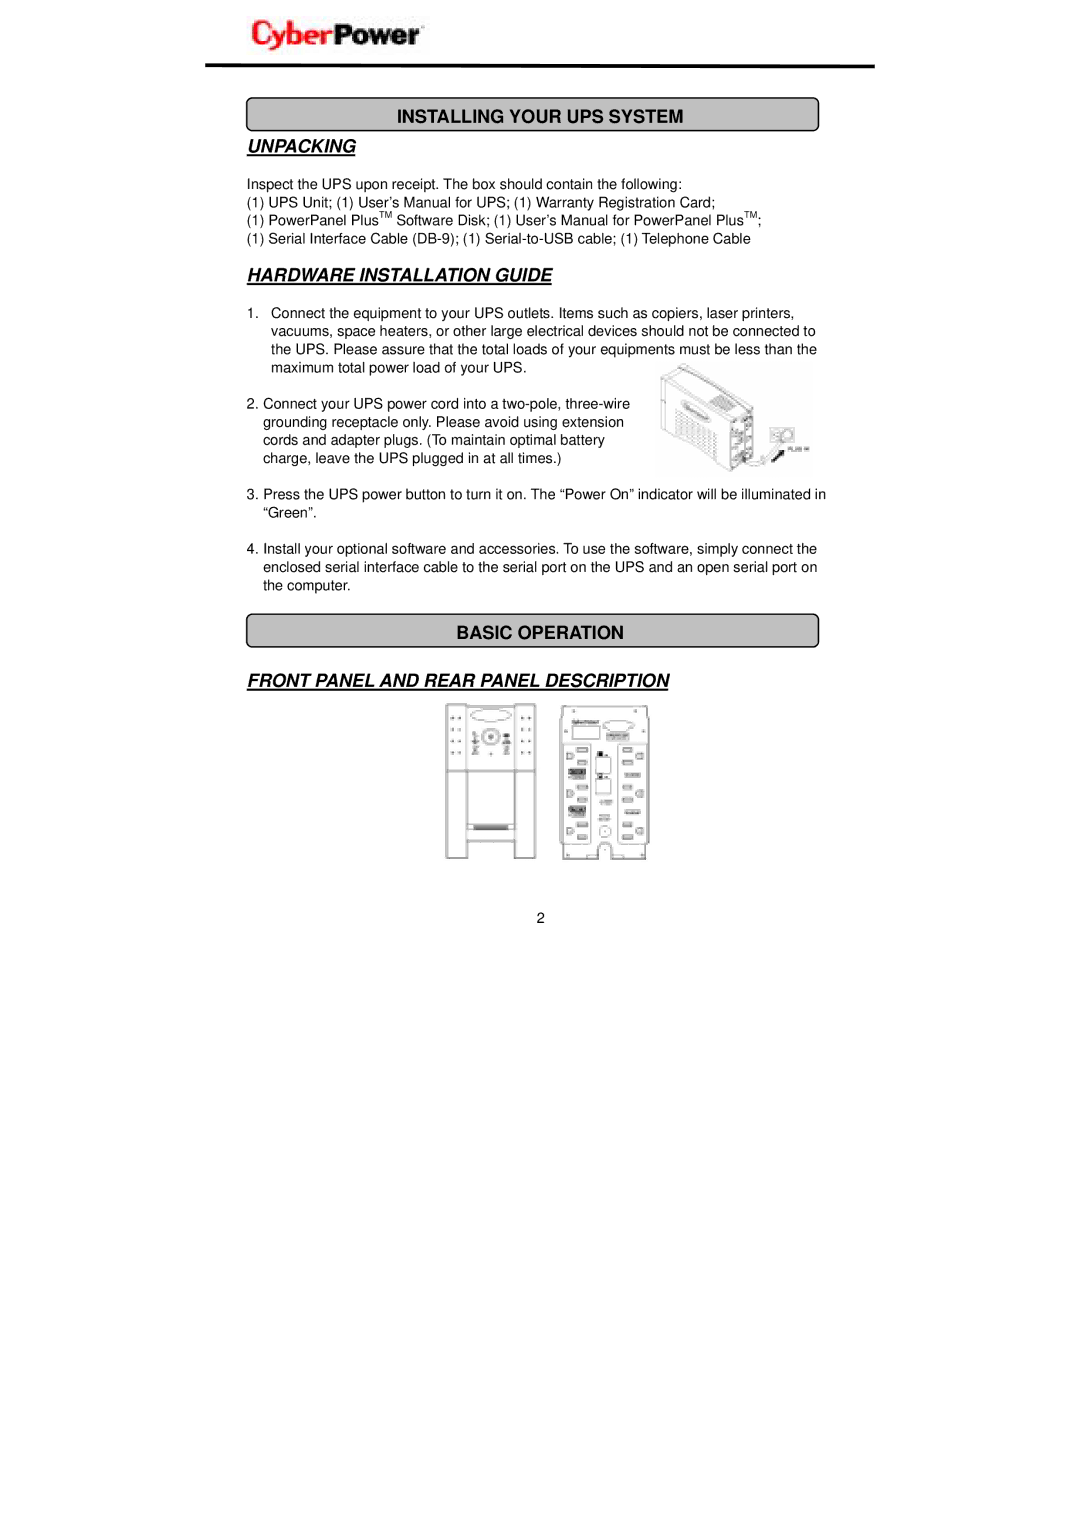 CyberPower Systems OP650 user manual Installing Your UPS System, Basic Operation 